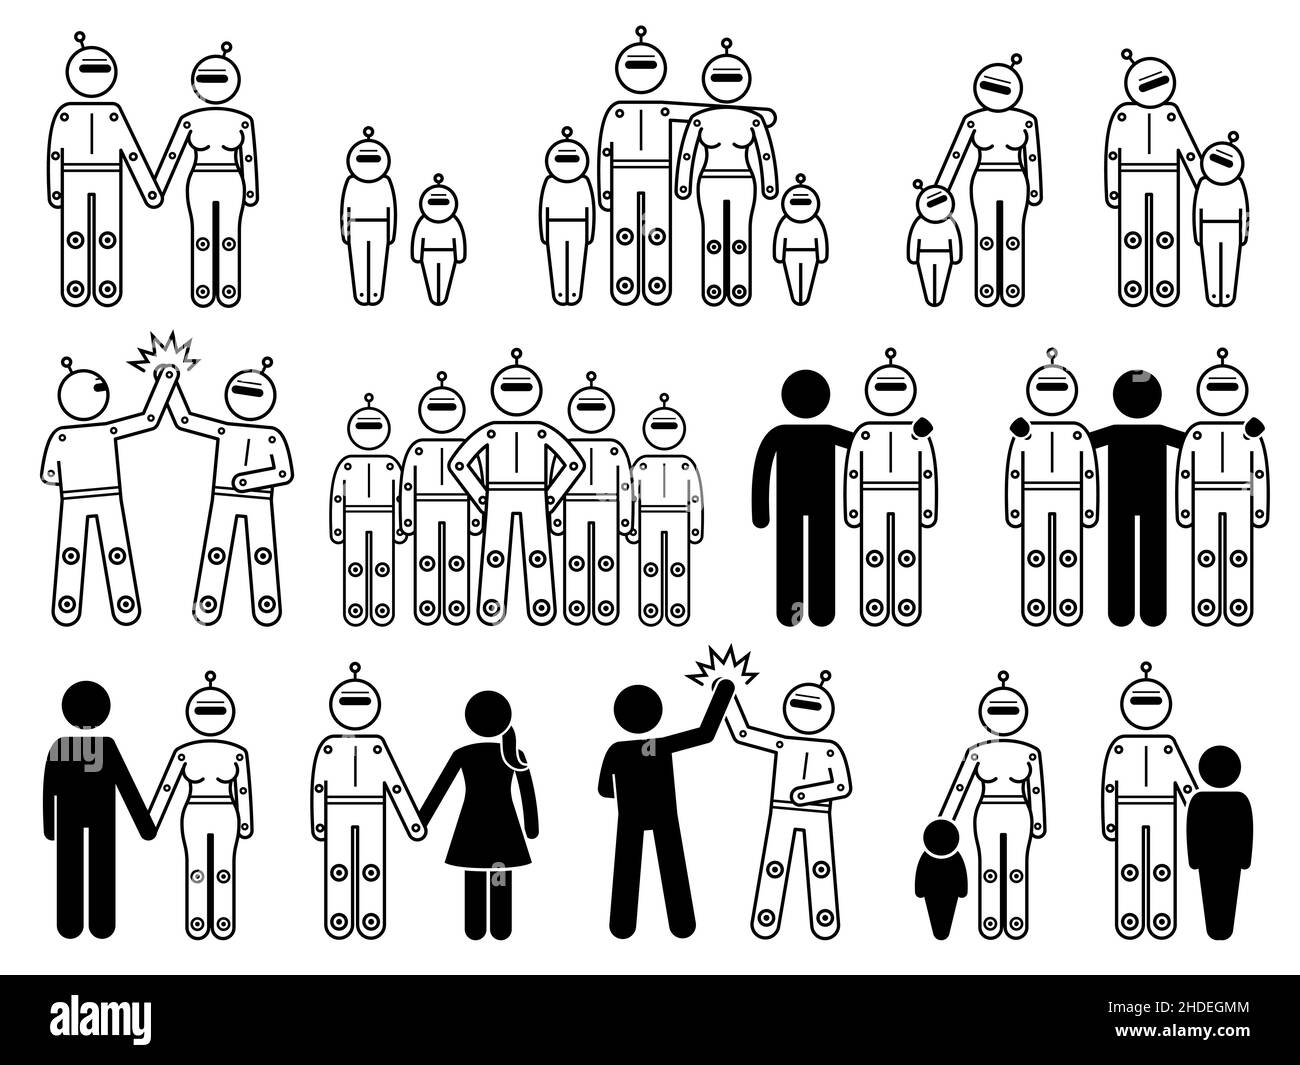 Robot android humanoid family and human. Vector illustrations of robot couple, family, friends, group, team, relationship, and cyborg parent. Stock Vector